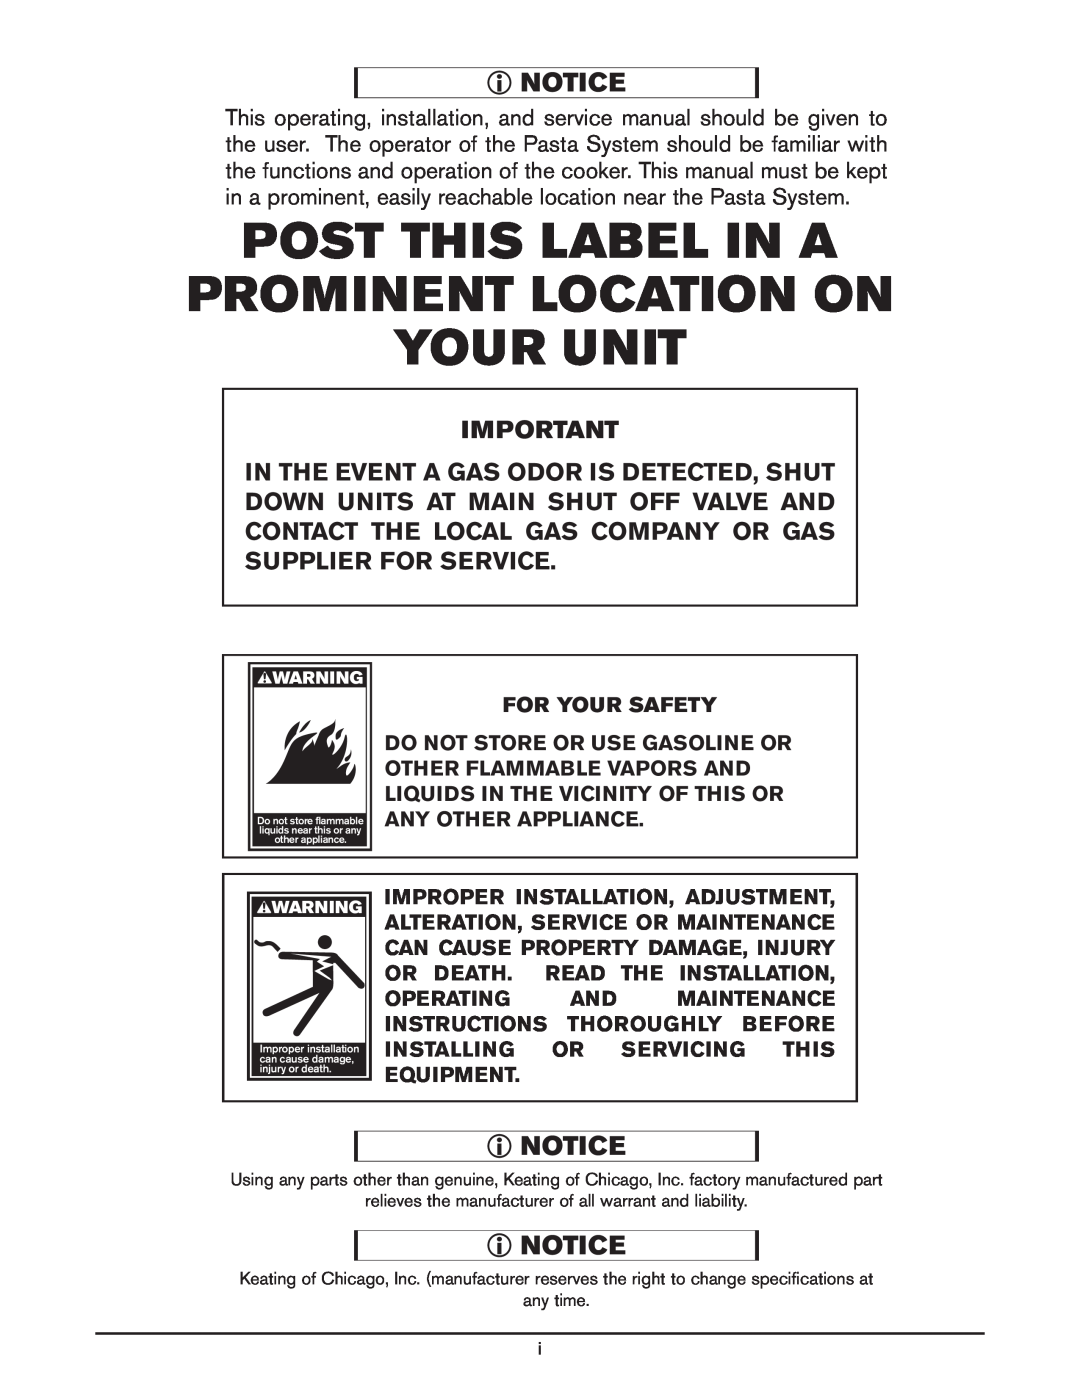 Keating Of Chicago 0107 service manual Post This Label In A Prominent Location On, Your Unit 